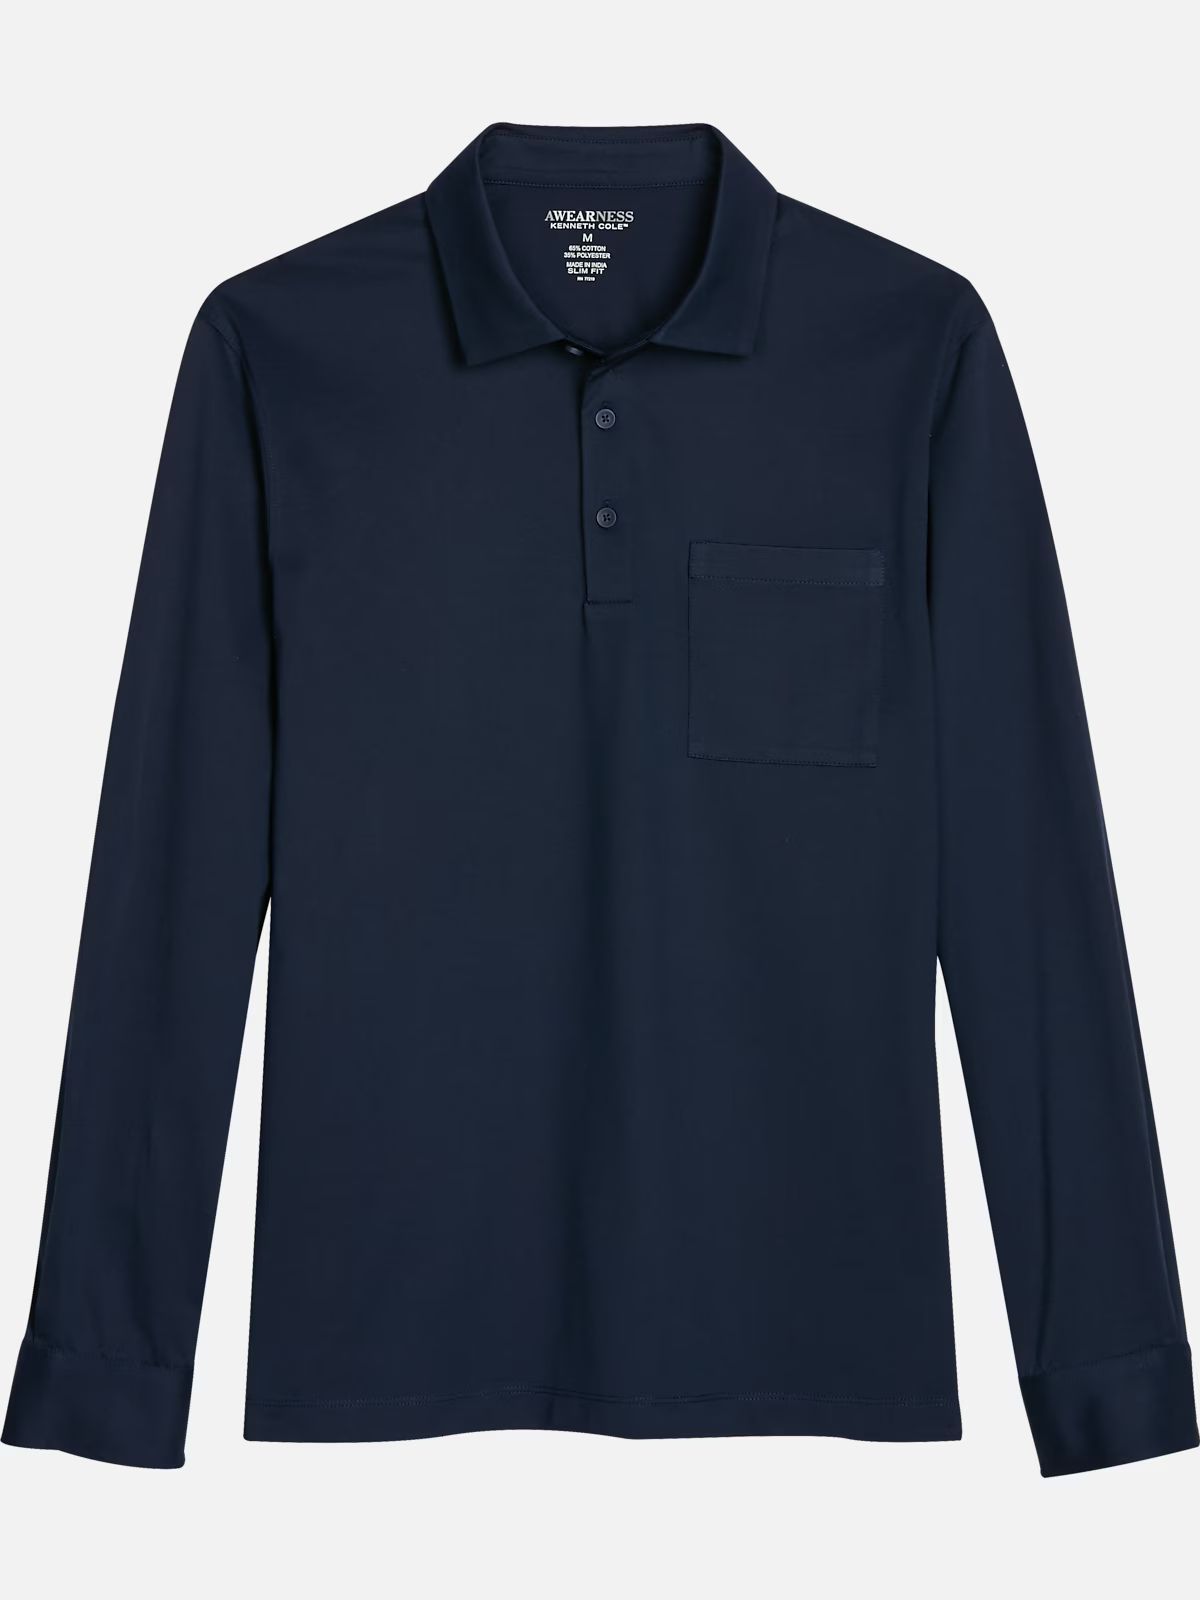 Awearness Kenneth Cole Slim Fit Jersey Polo | Casual Shirts| Men's Wearhouse | The Men's Wearhouse